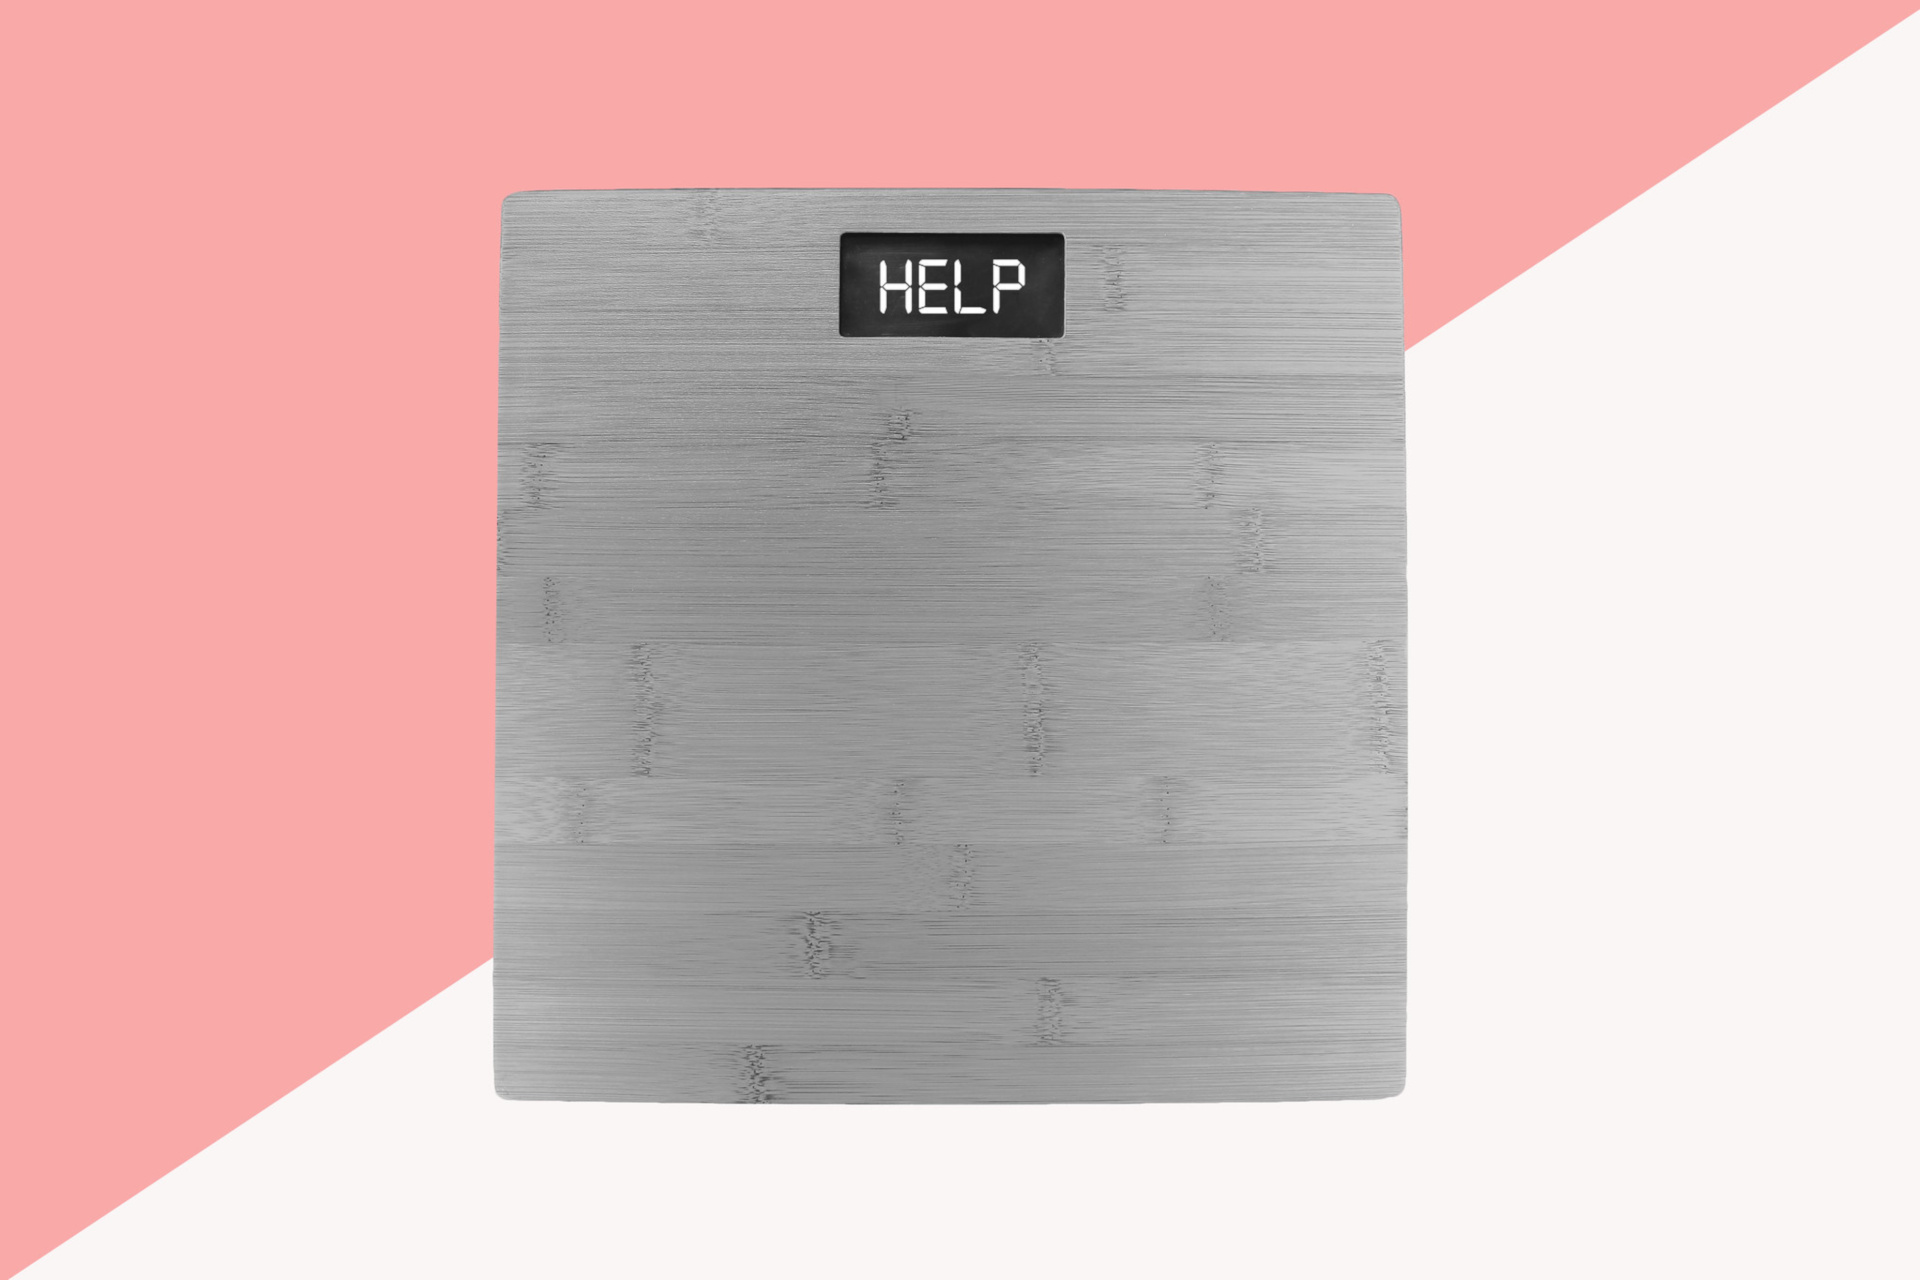 Weight Scales With The Word Help On The Display